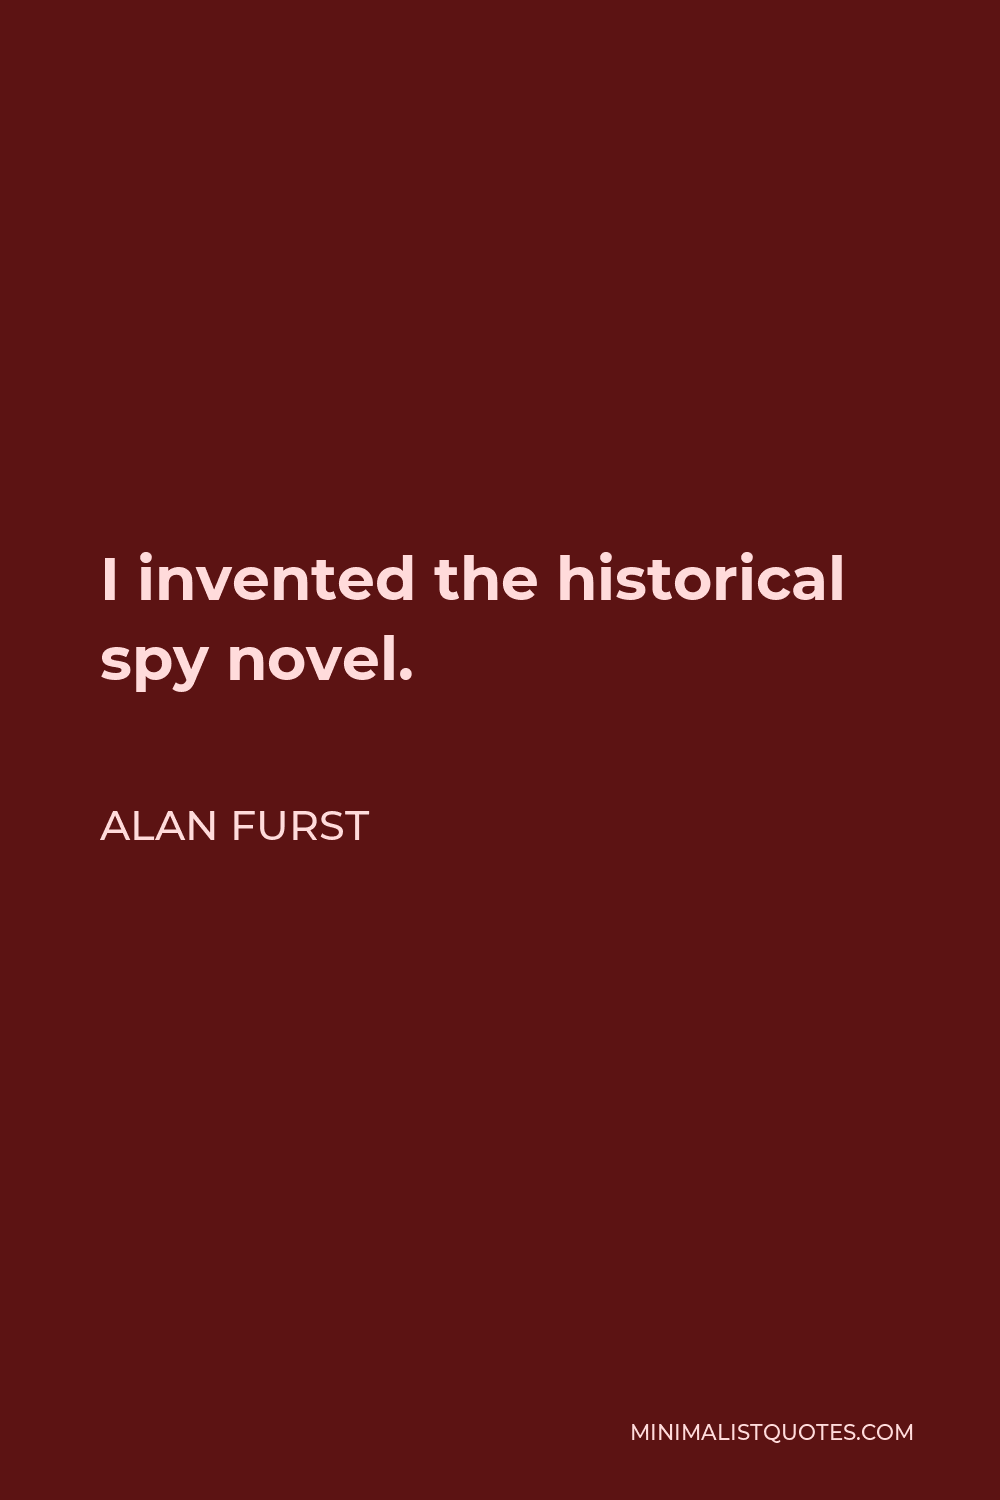 Alan Furst Quote - I invented the historical spy novel.